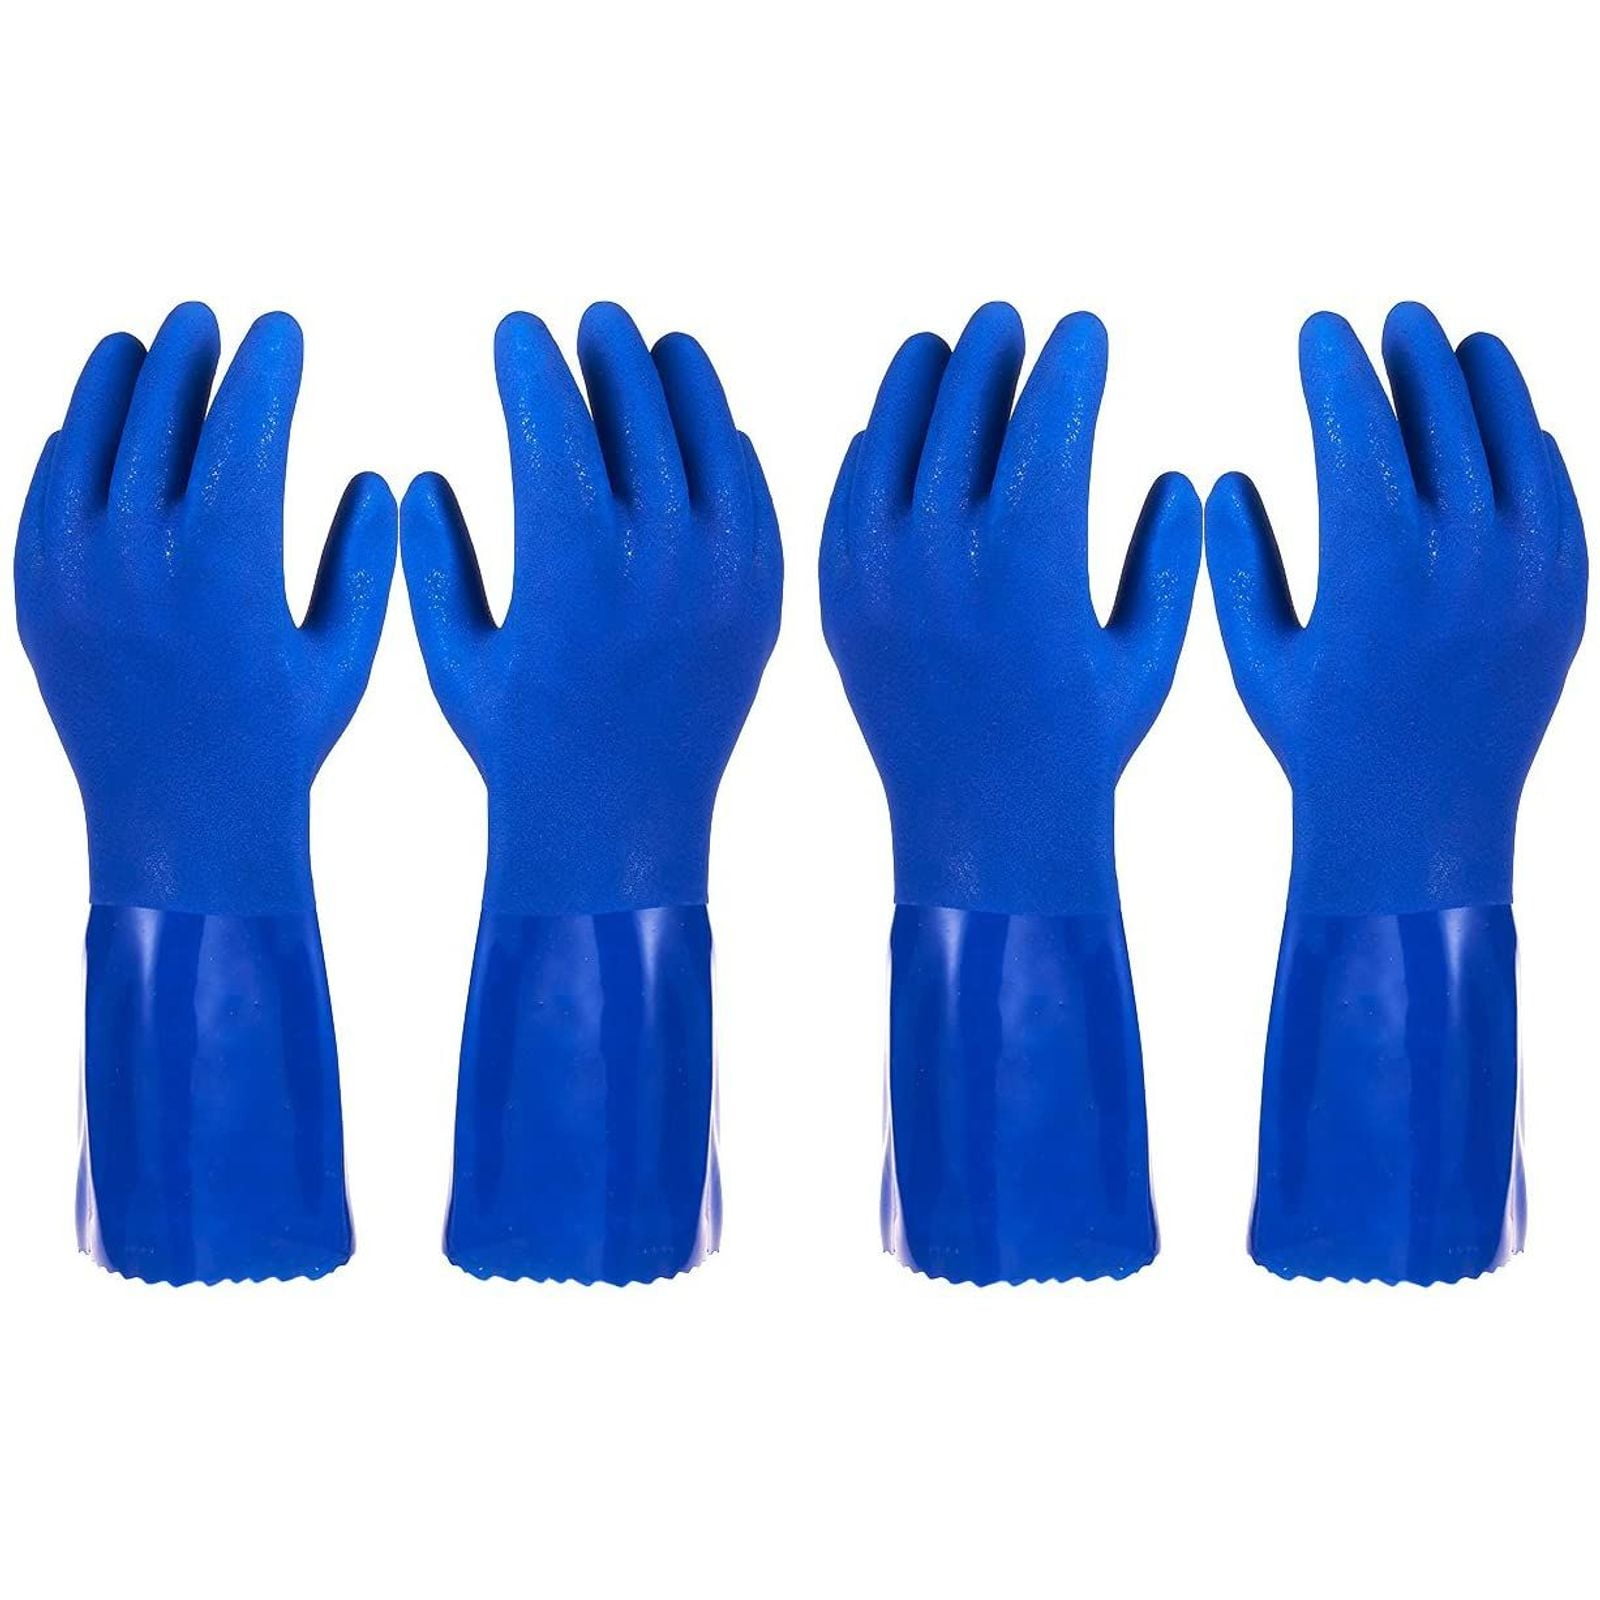 Multi Purpose Household Rubber gloves Kitchen Dishes cleaning & washing new 